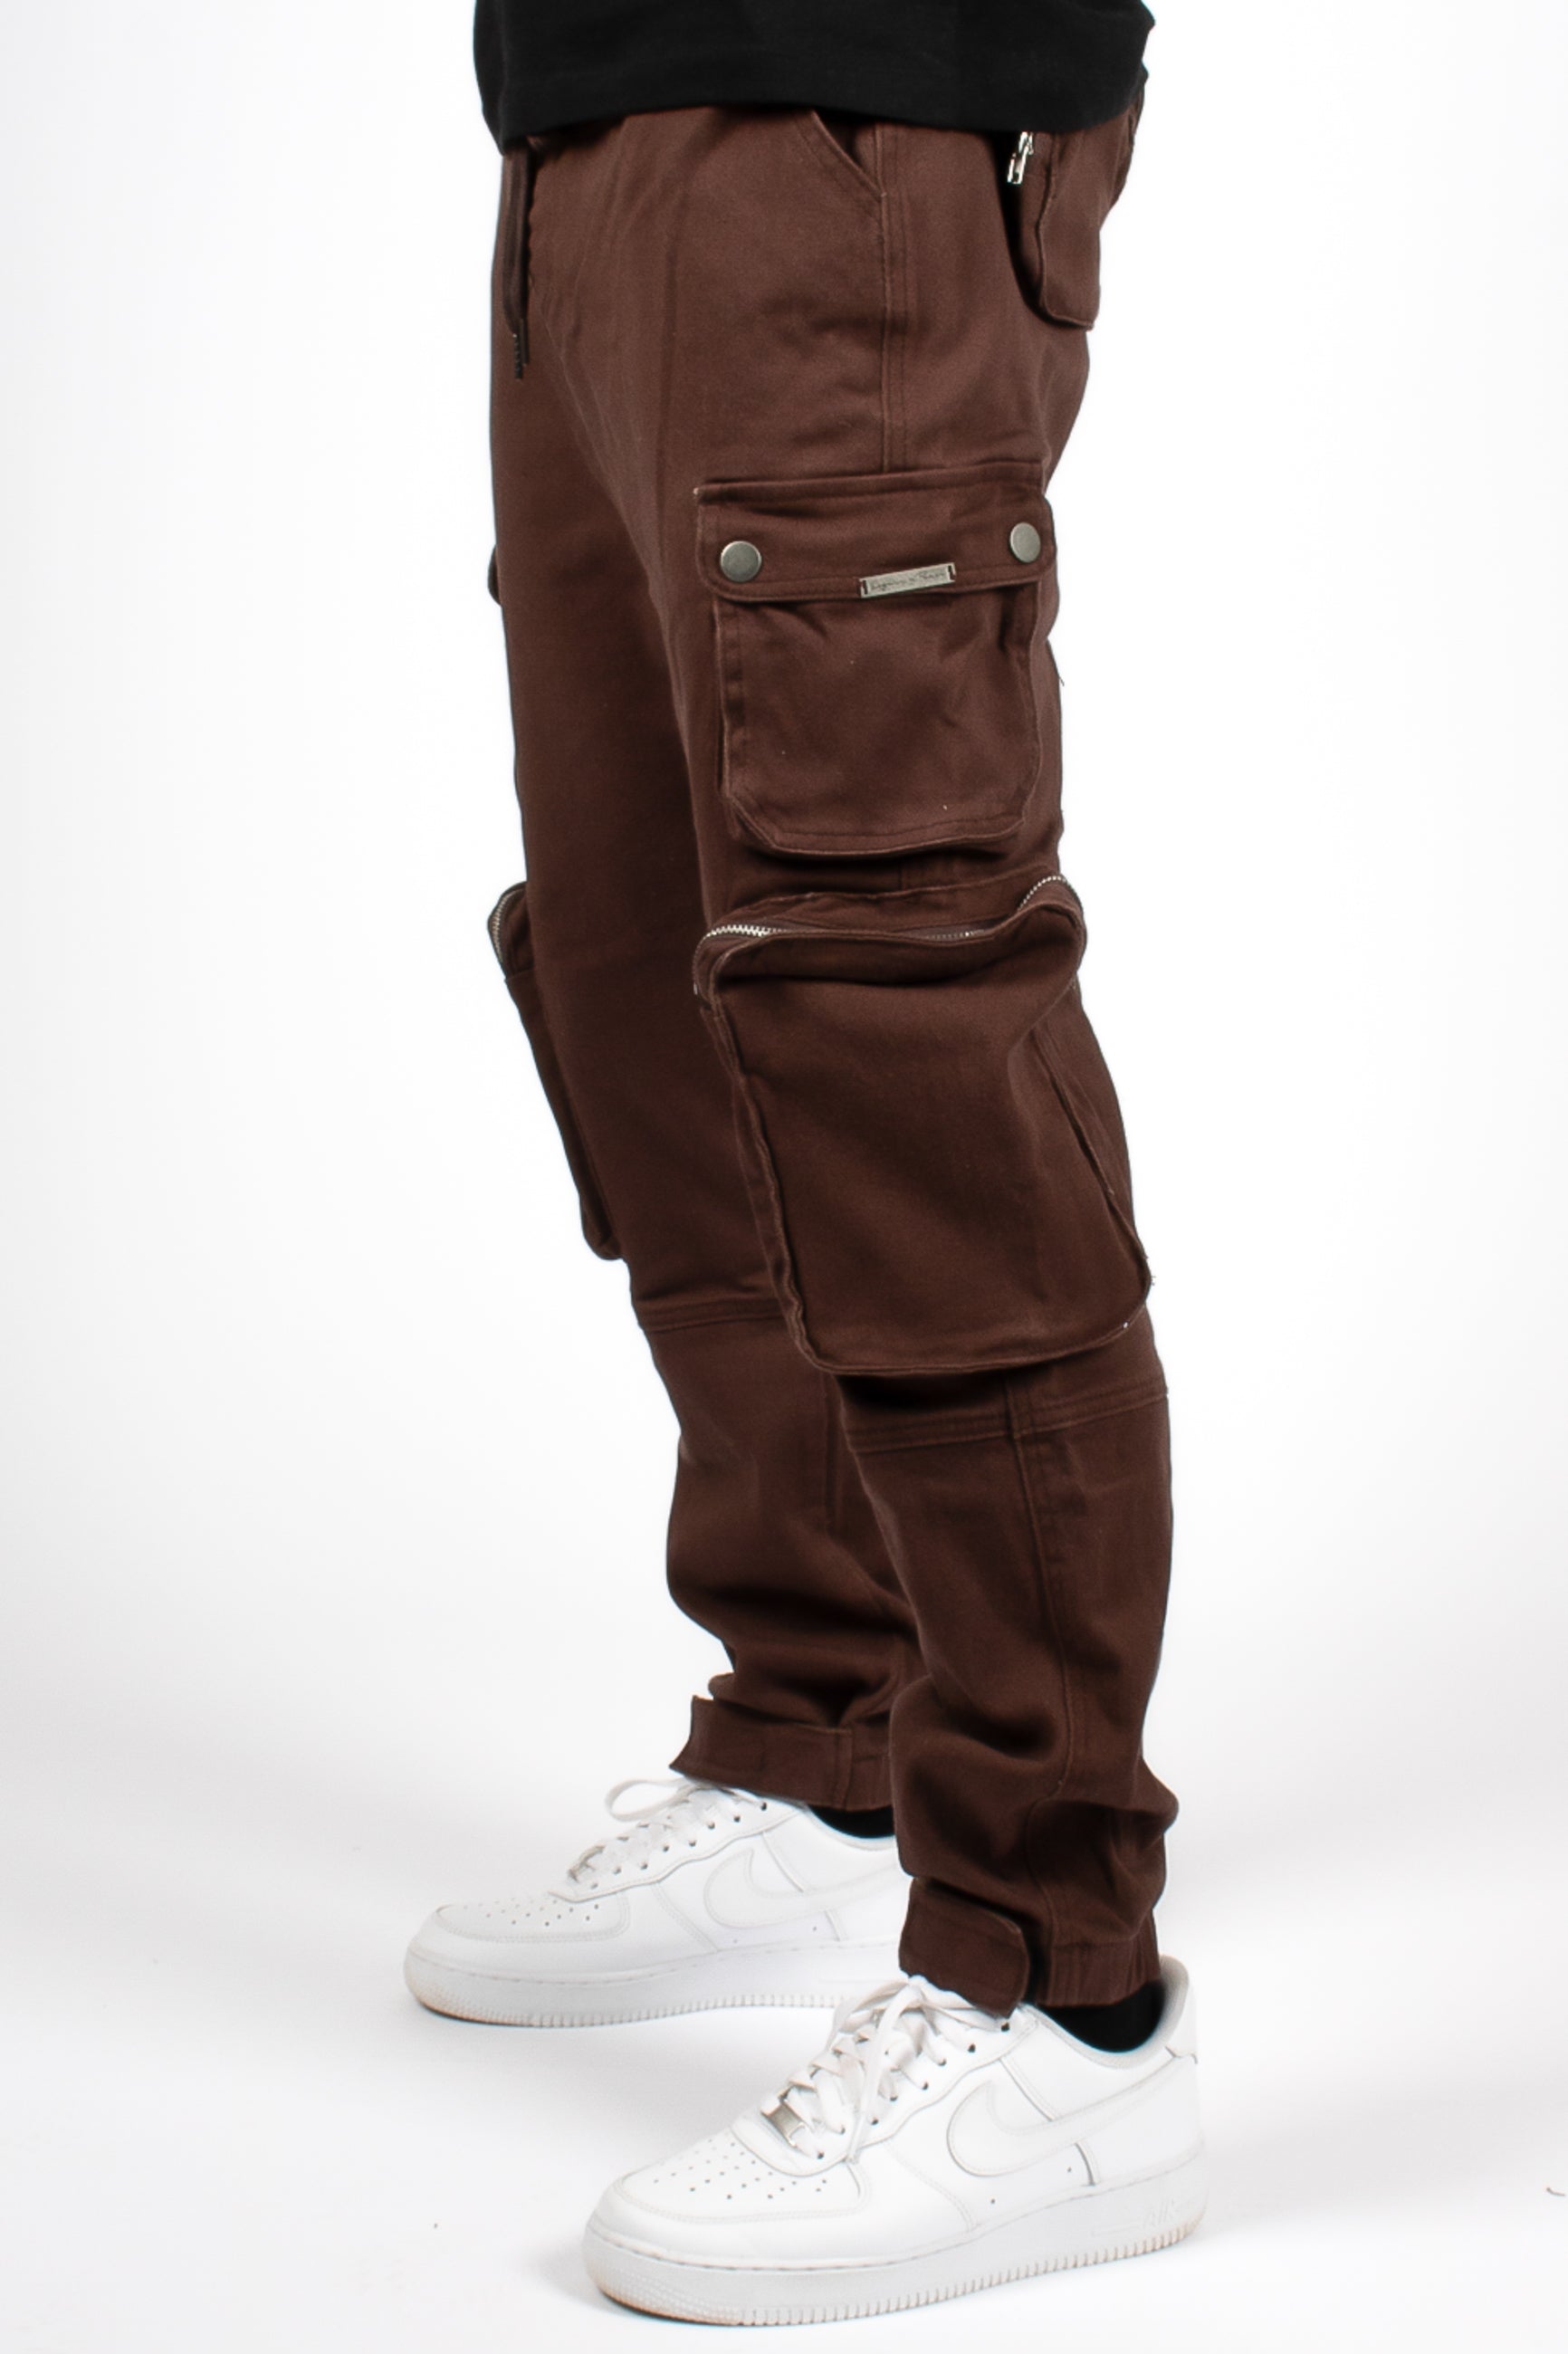 Buy Devil Men's Brown Cotton Solid Convertible Slim fit Cargos (Brown, 30)  at Amazon.in